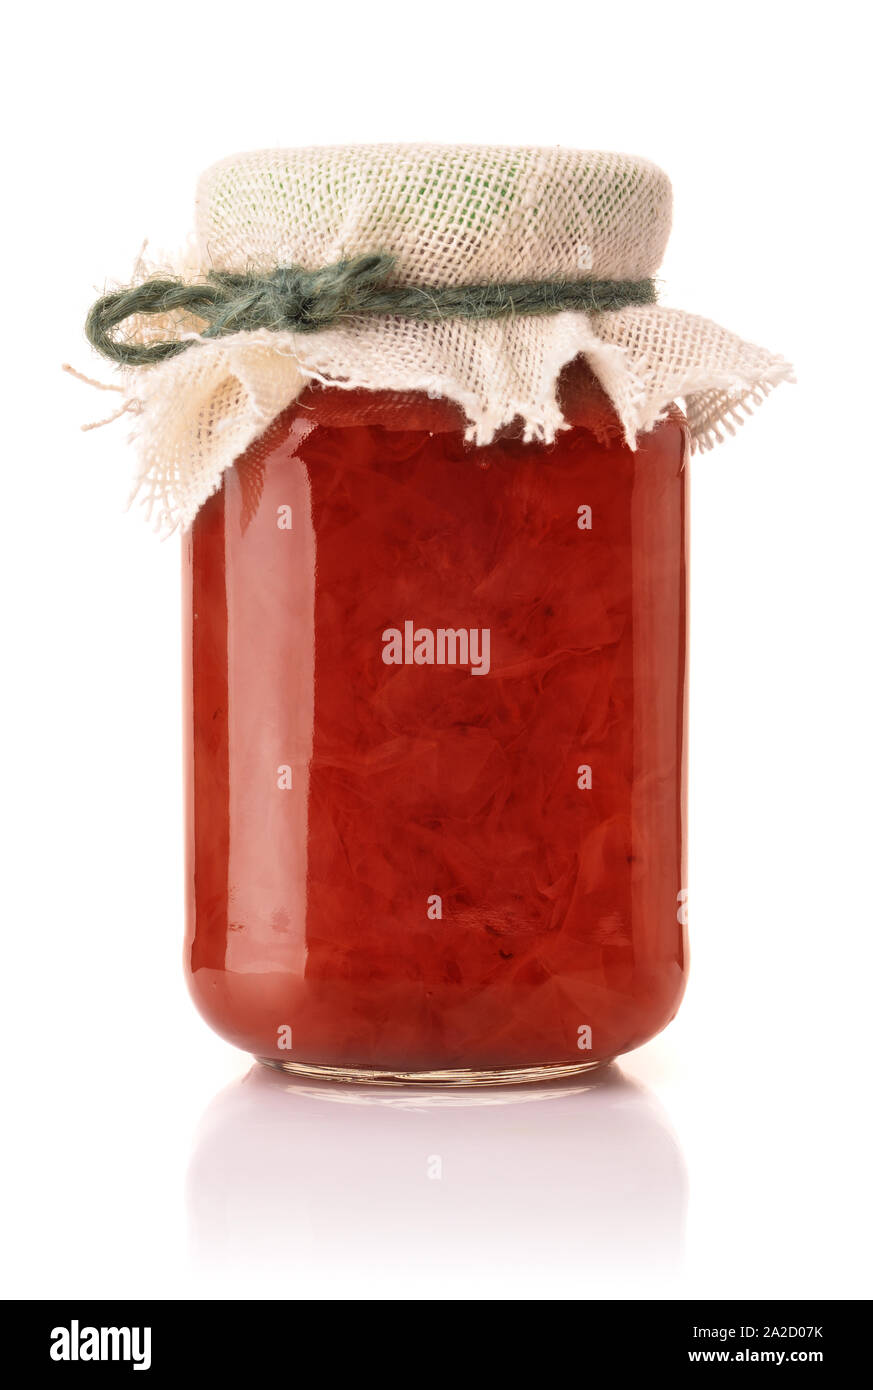 Front view of rose petal jam in glass jar isolated on white Stock Photo